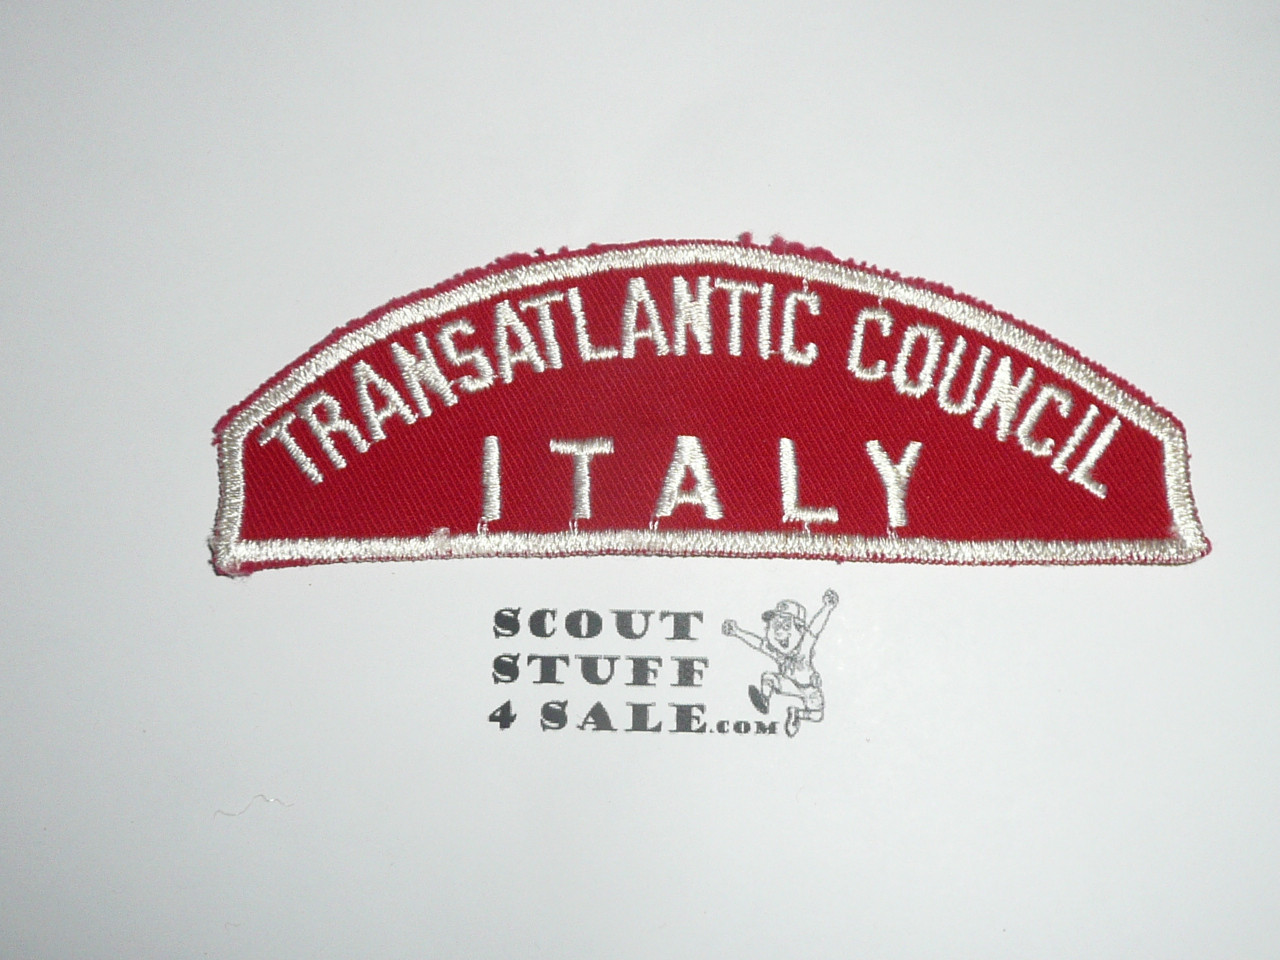 Transatlantic Council ITALY Red/White Council Strip, used -Scout